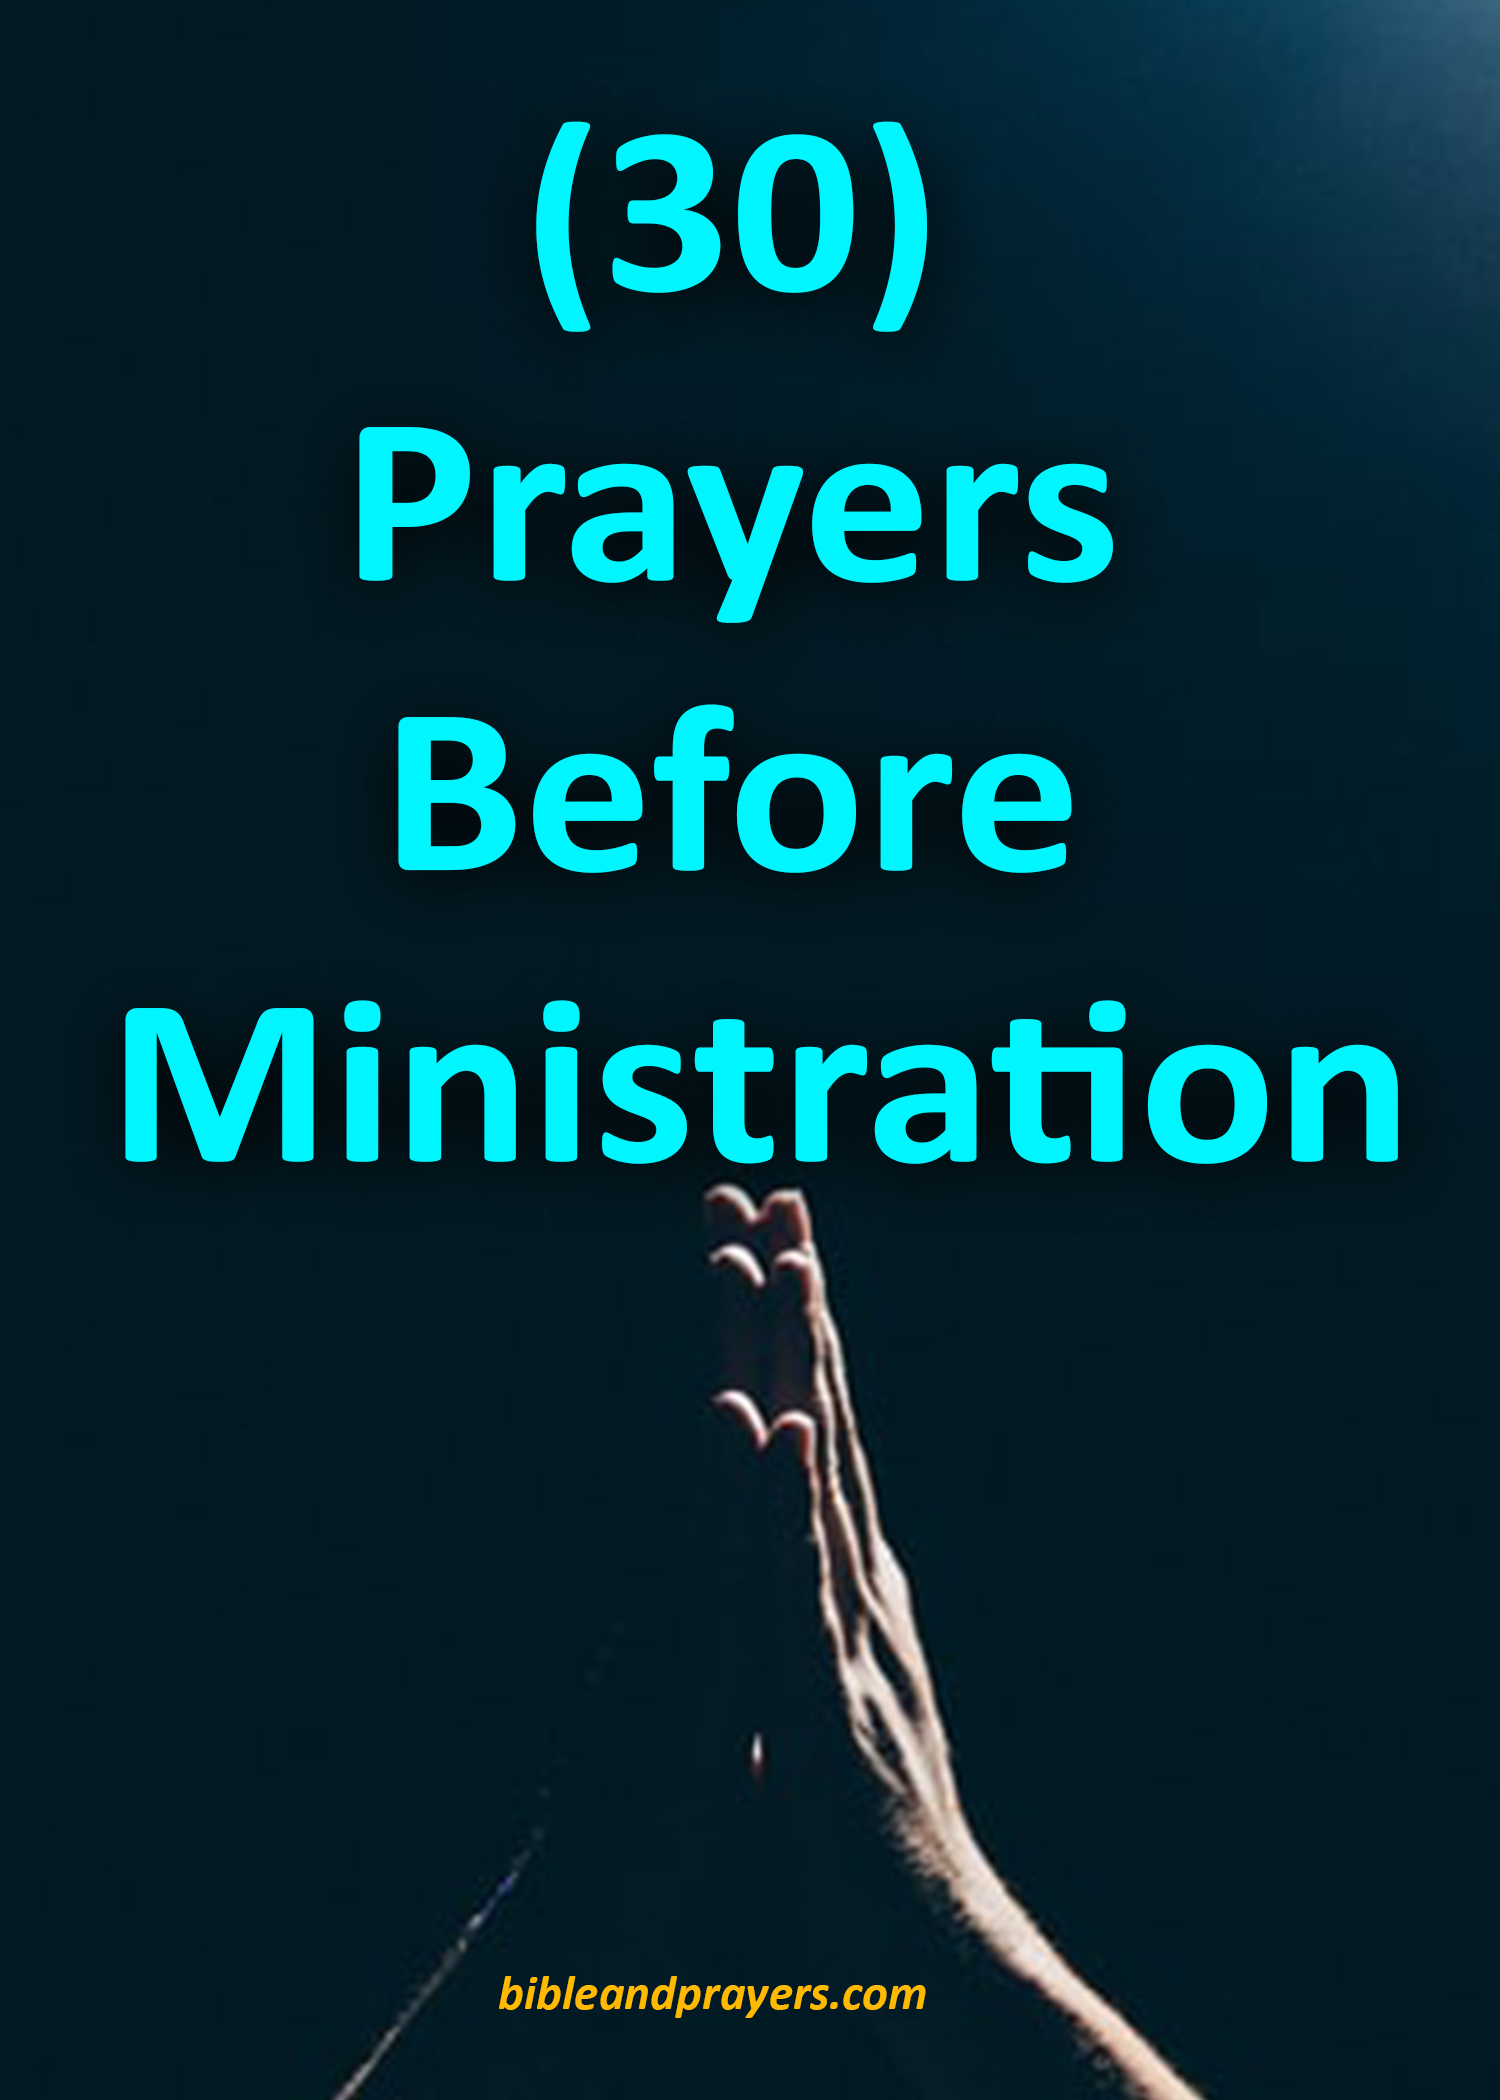 30 Prayers Before Ministration